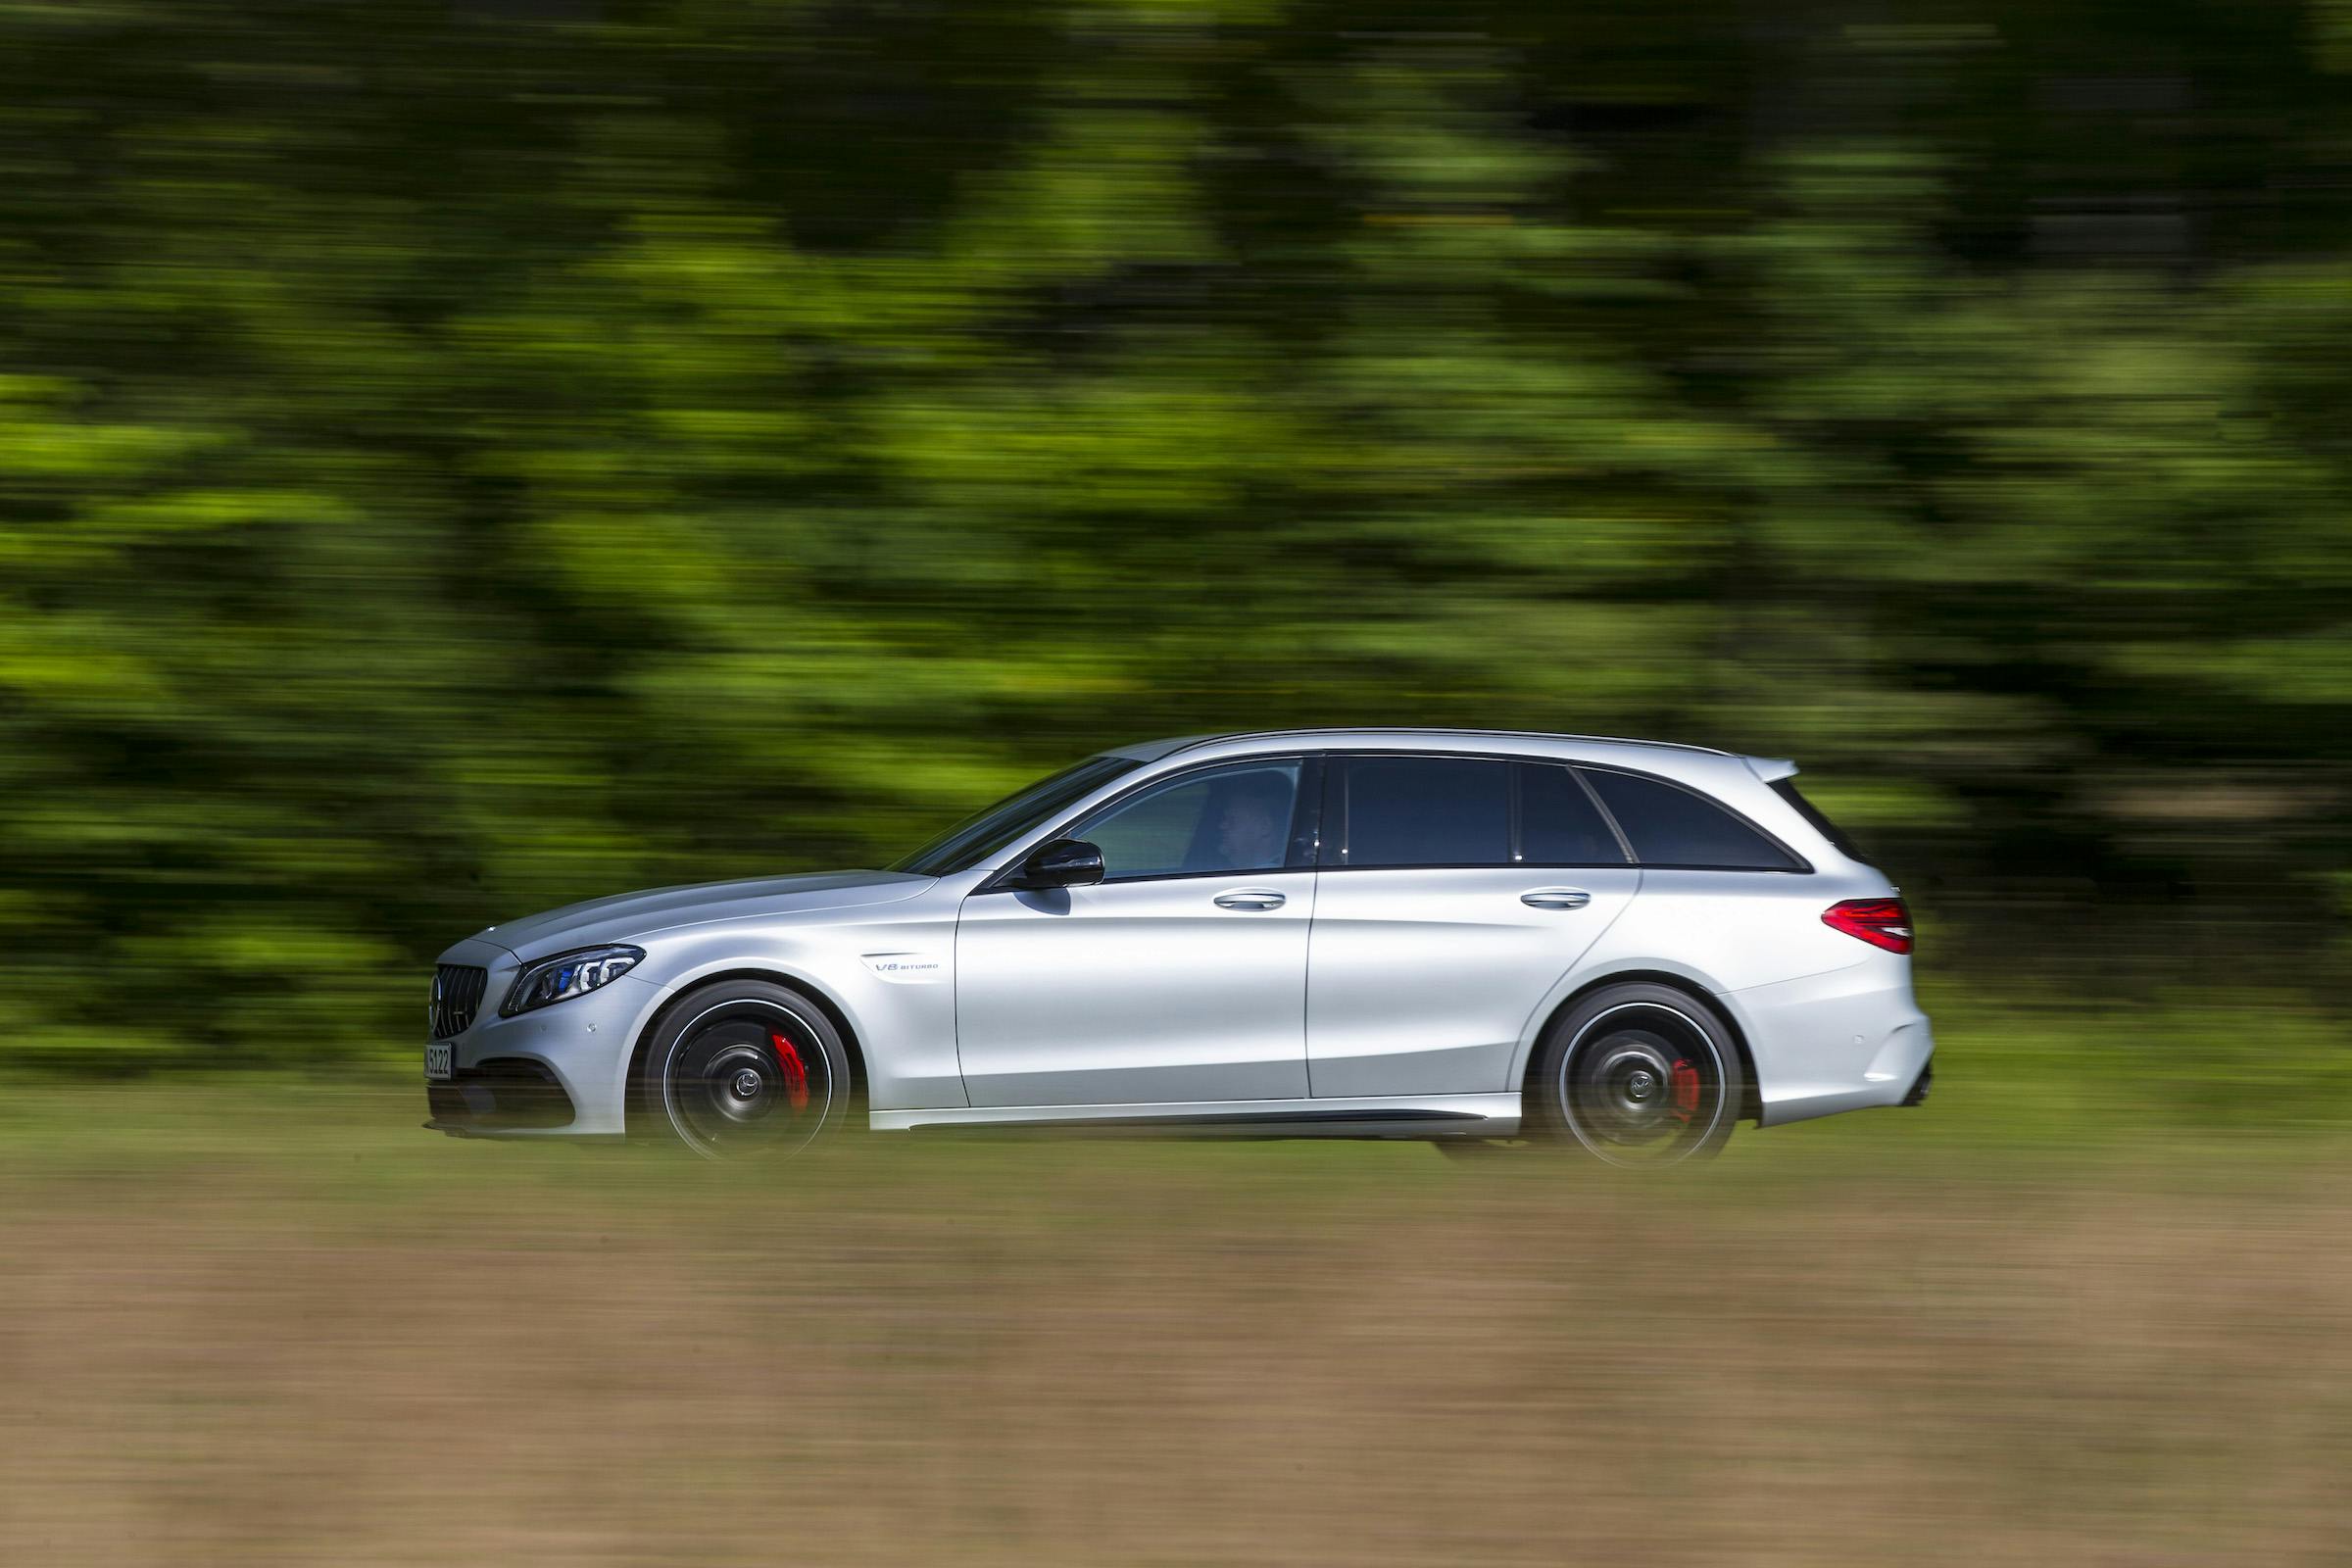 Mercedes-AMG C63 S side profile driving action